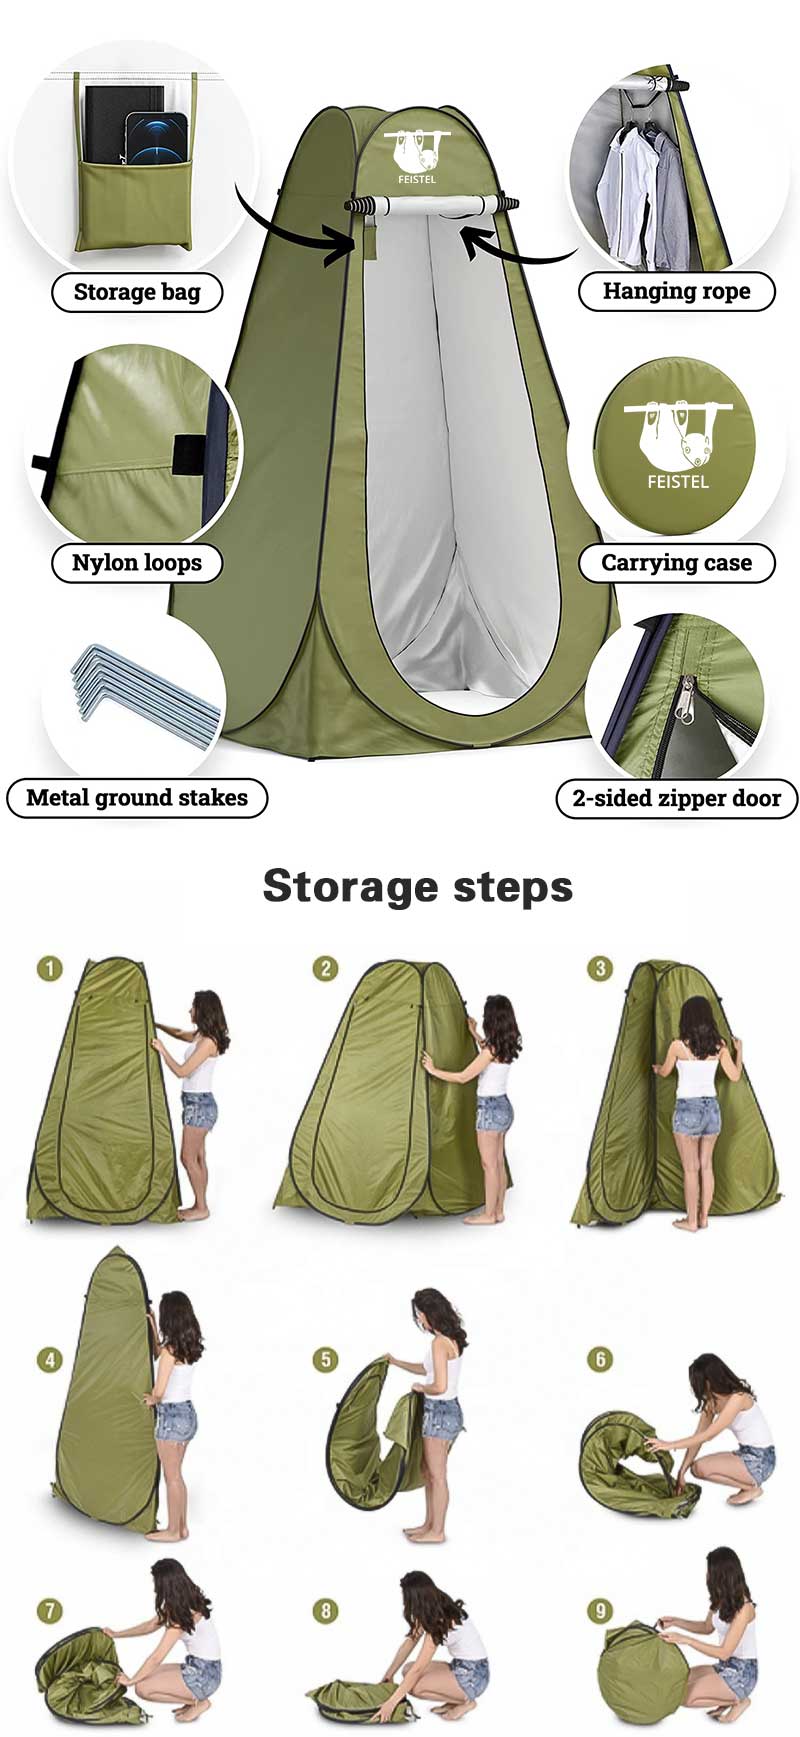 privacy tent